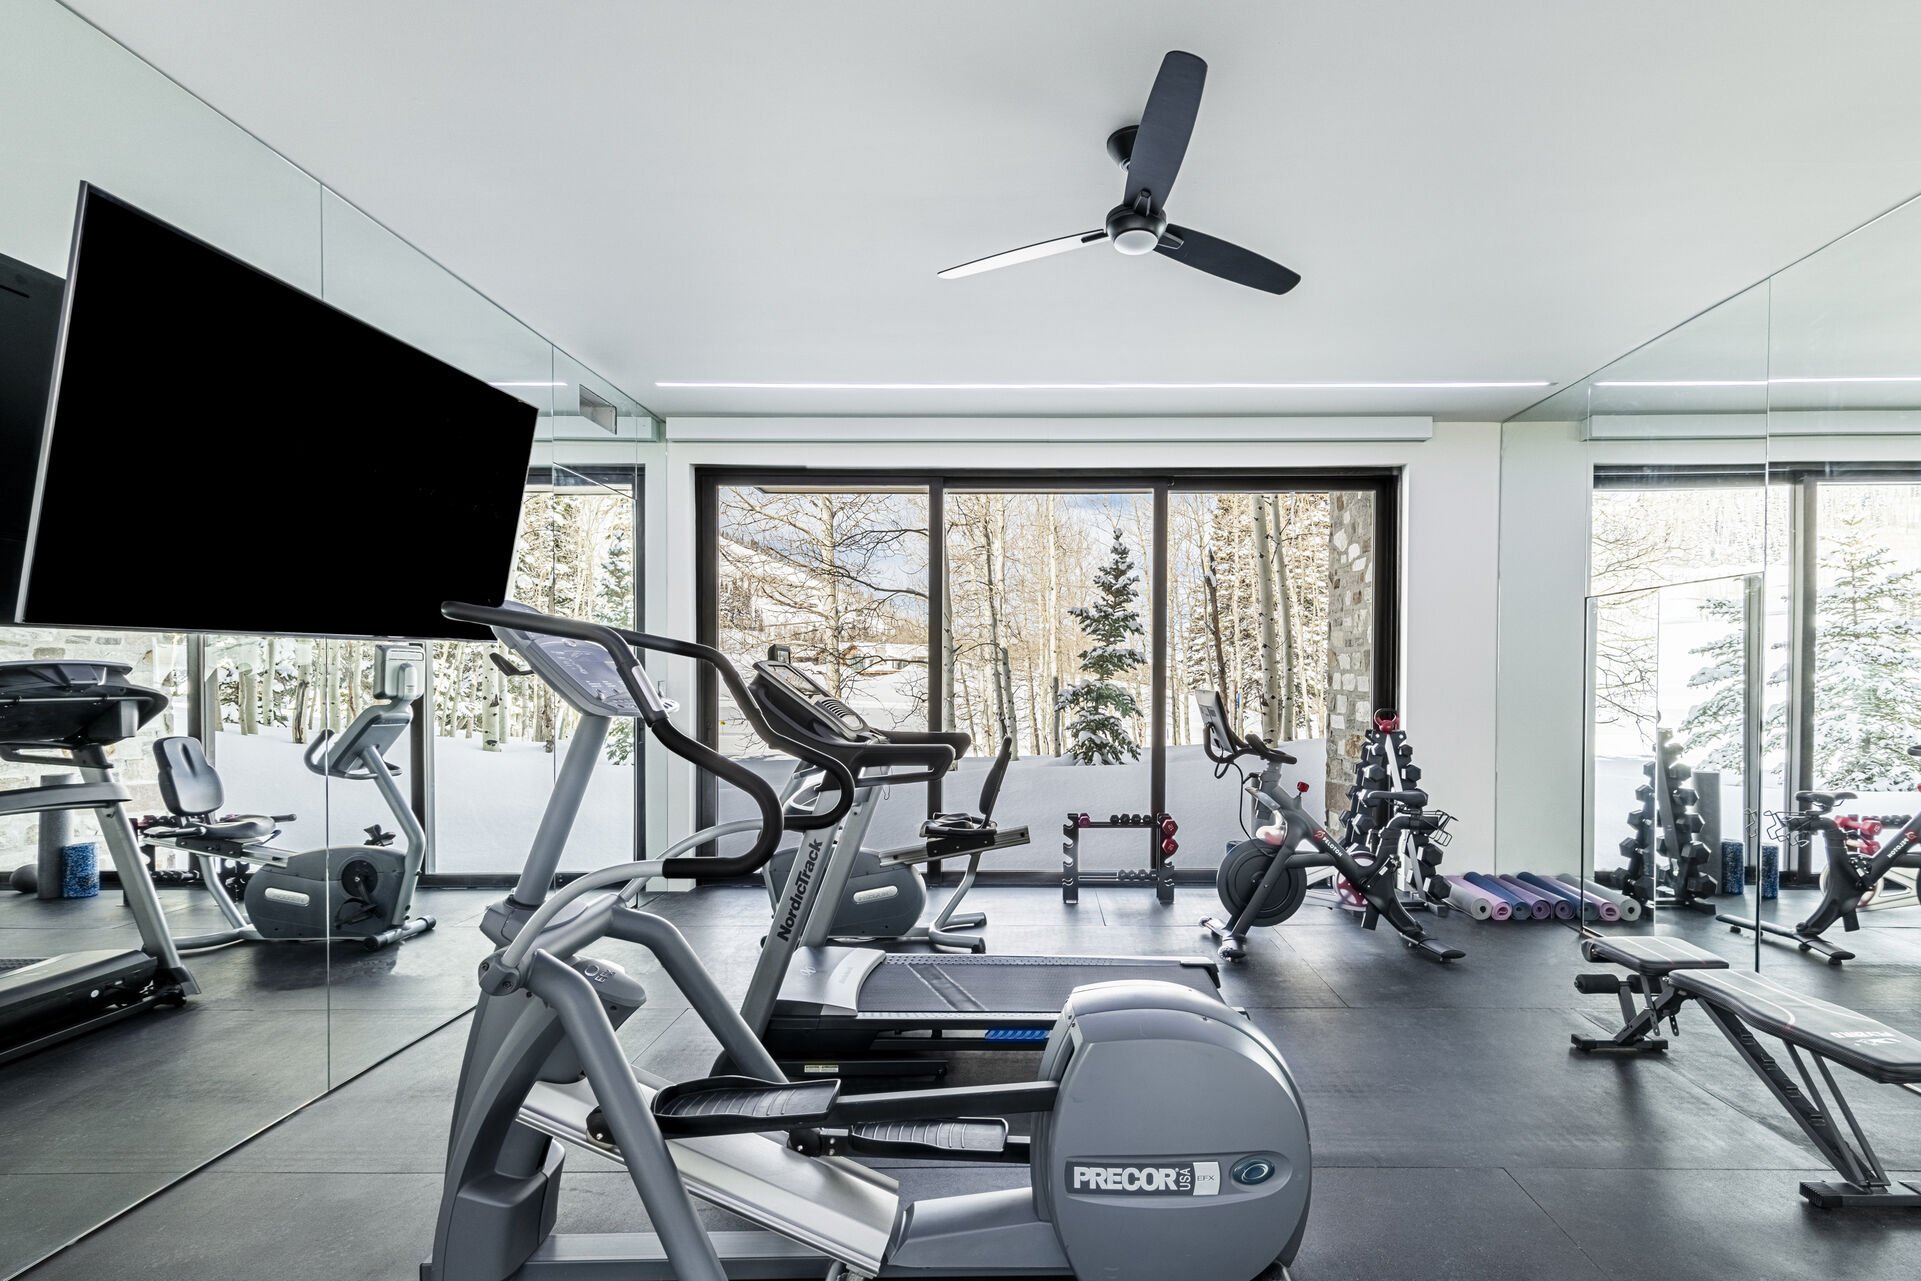 Lower level fitness center with a Smart TV